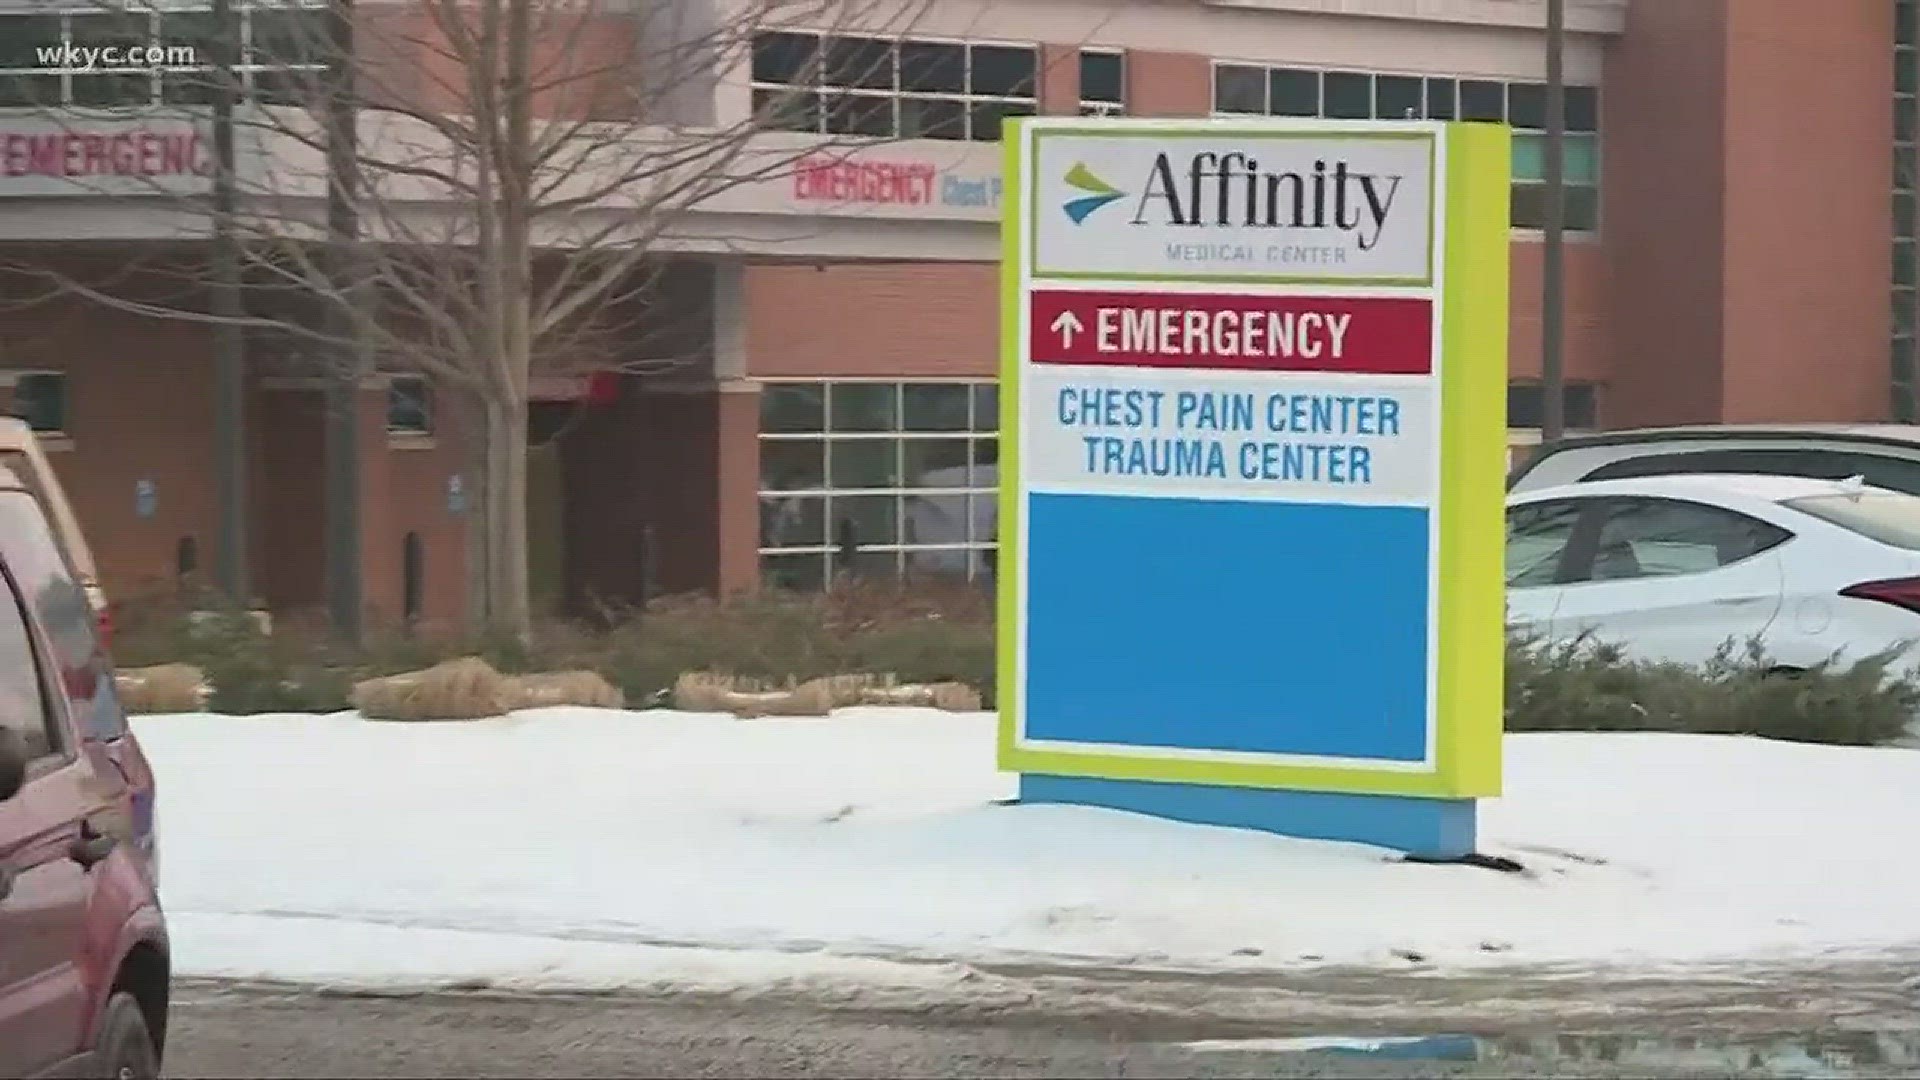 Several groups are working to save Affinity Medical Center